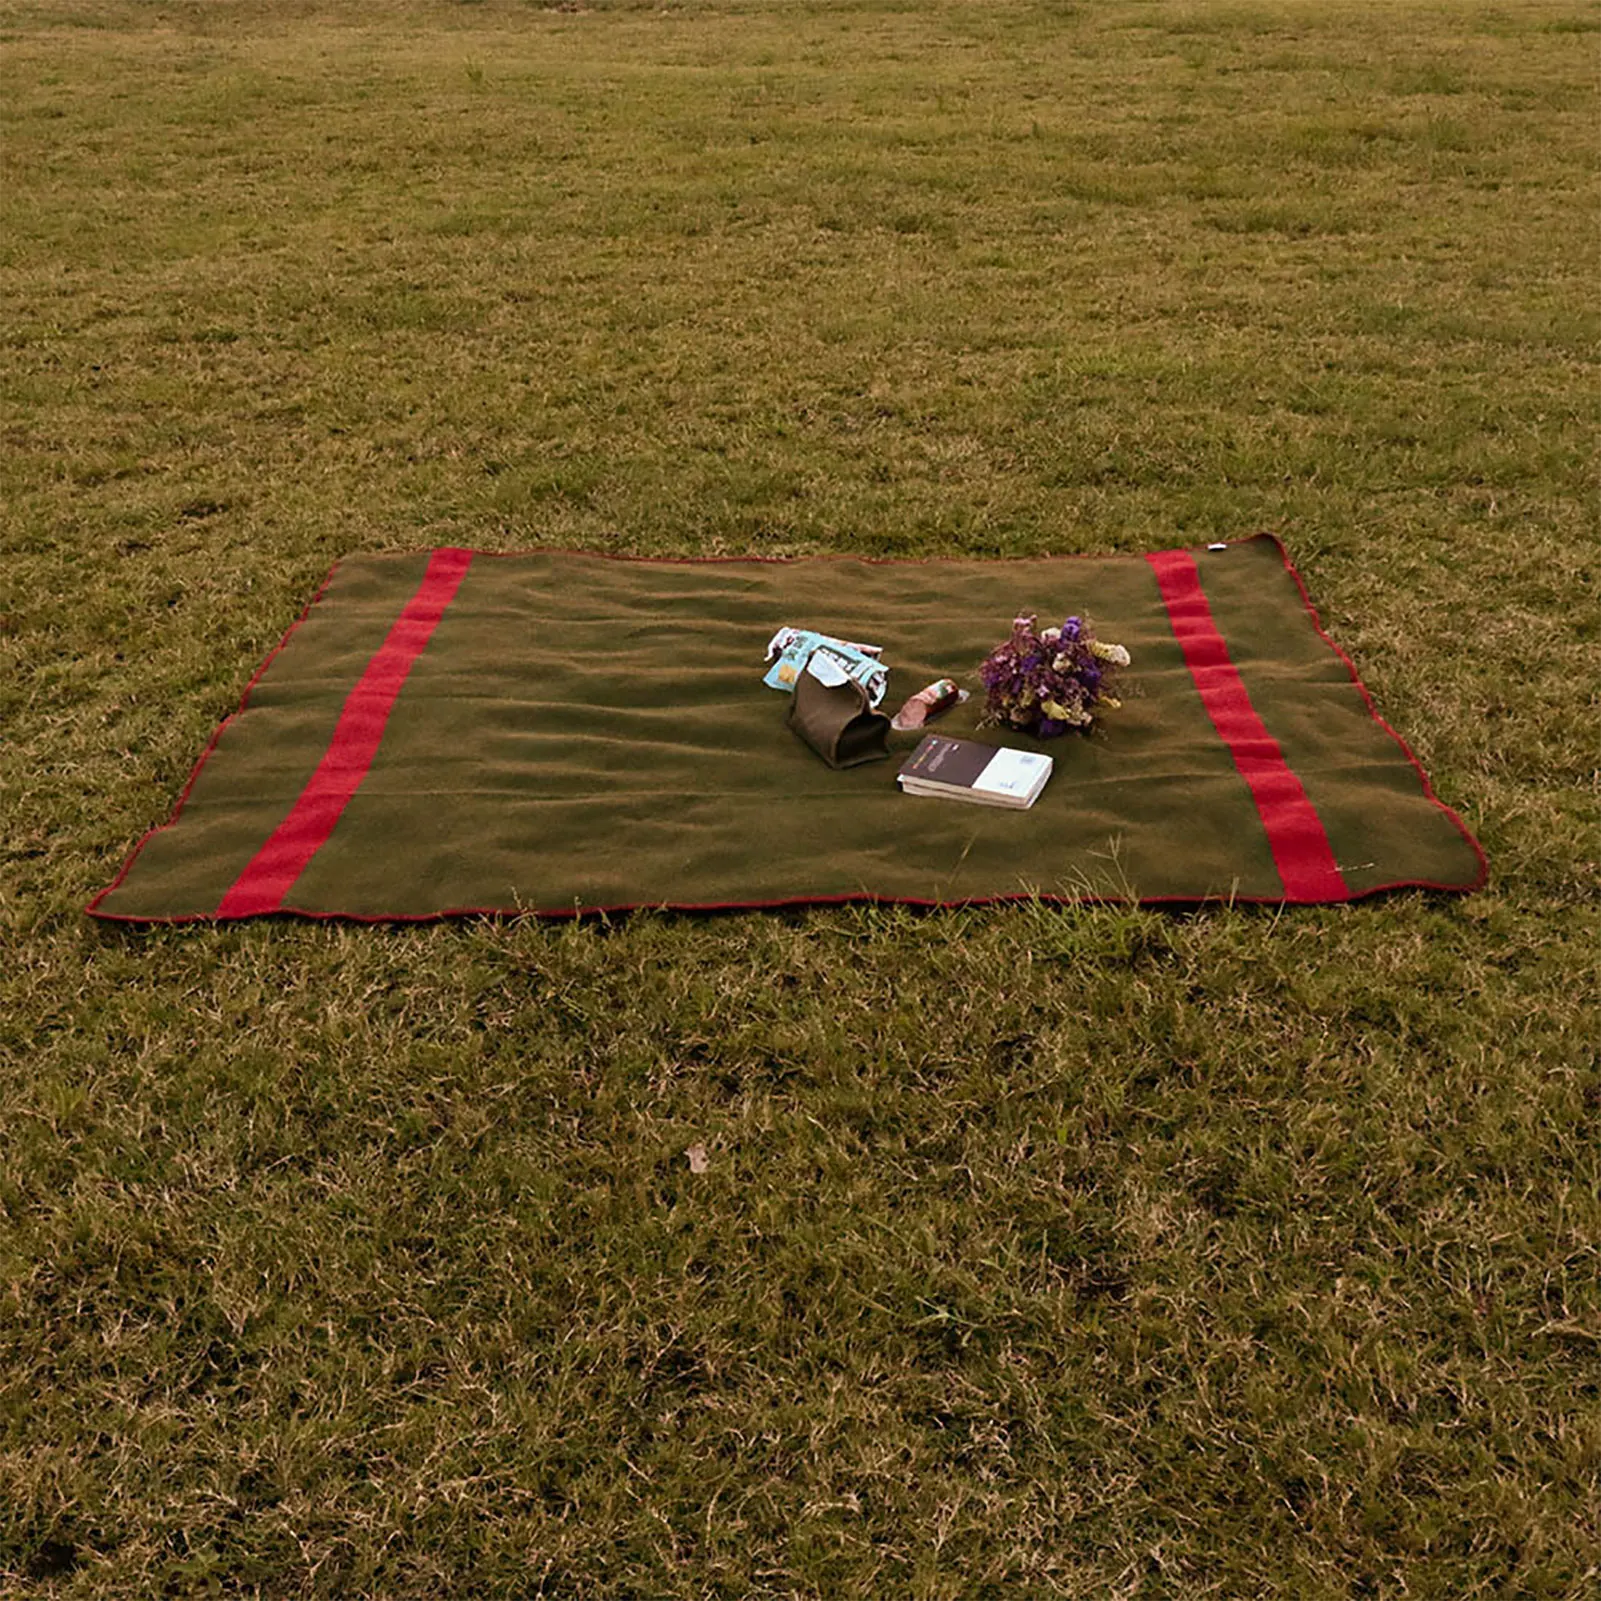 

Warm Wool Blanket Windproof Soft Camping Blanket 59*79 Inches Outdoor Picnic Tent Mat For Cold Weather Hiking Picnic Stadium